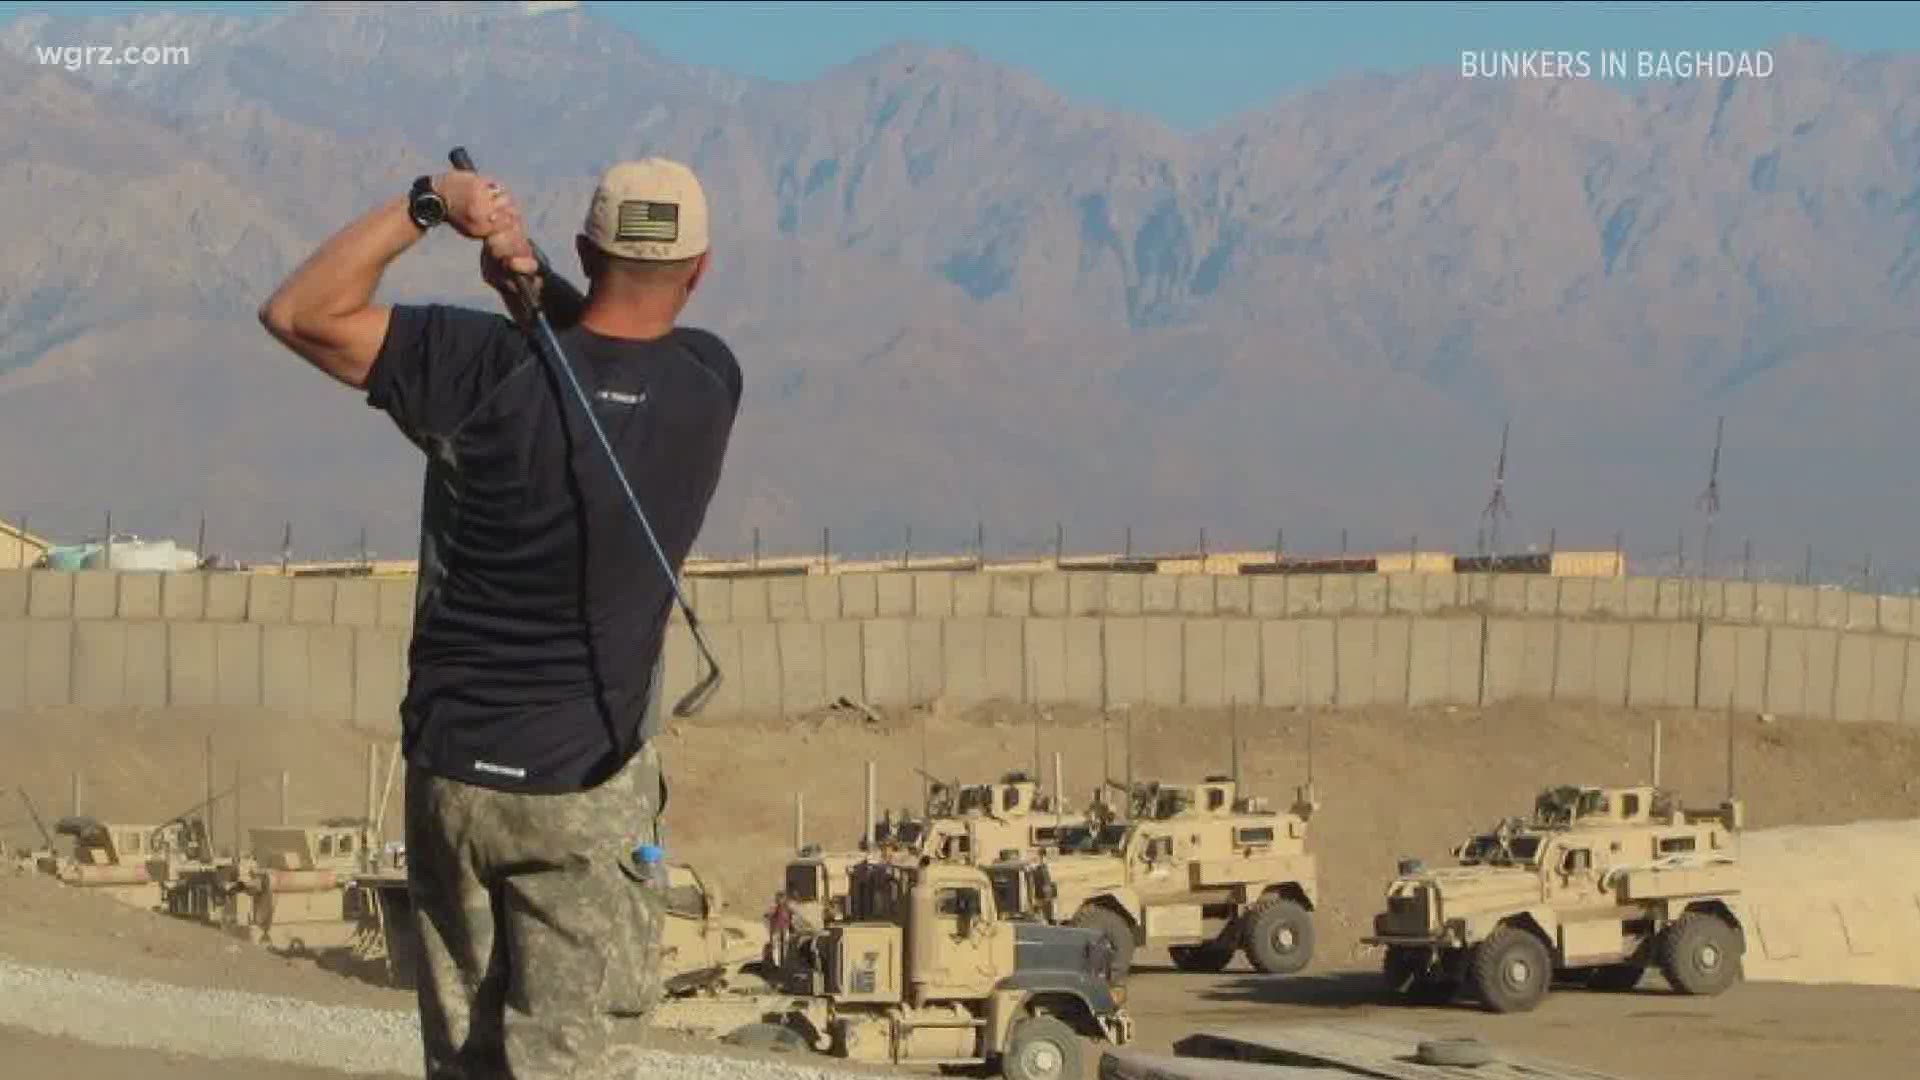 Bunkers in Baghdad has collected 11 million golf balls for troops serving overseas over the last 11 years.